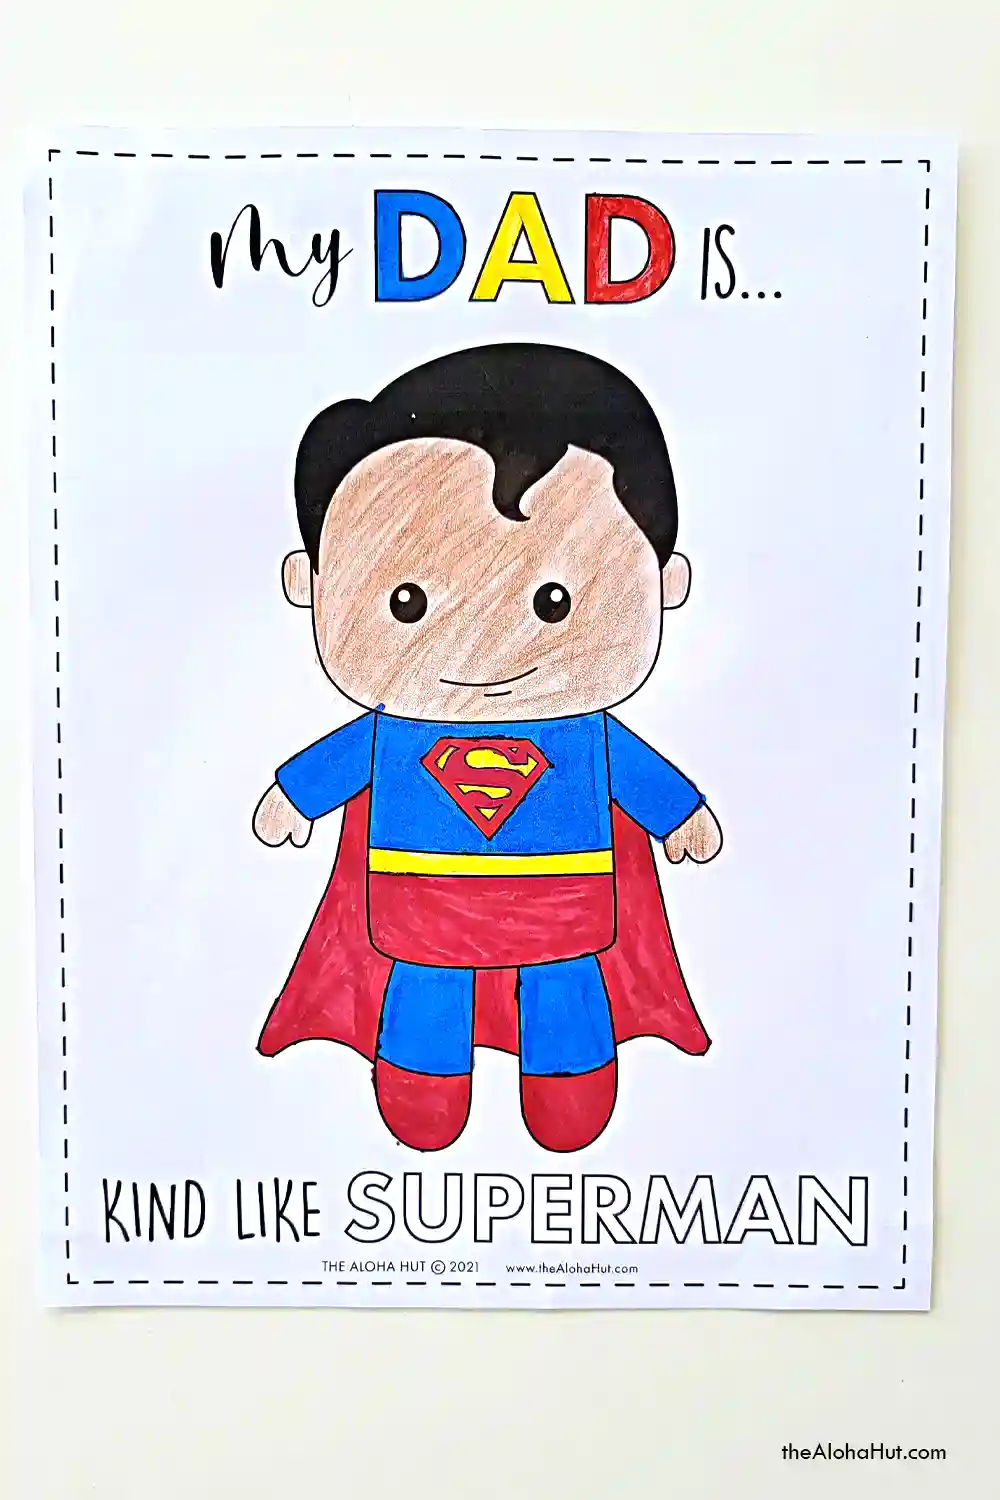 Father's Day superhero coloring pages and easy superhero Father's Day cards for dad. Download the printable superhero coloring pages and cards plus the All About Dad questionnaire for a fun and easy Father's Day gift for dad. Color the pages and superhero cards, fill out the questionnaire about dad, and then gather all his favorite treats for a fun family movie night for Father's Day watching your favorite superhero movie!